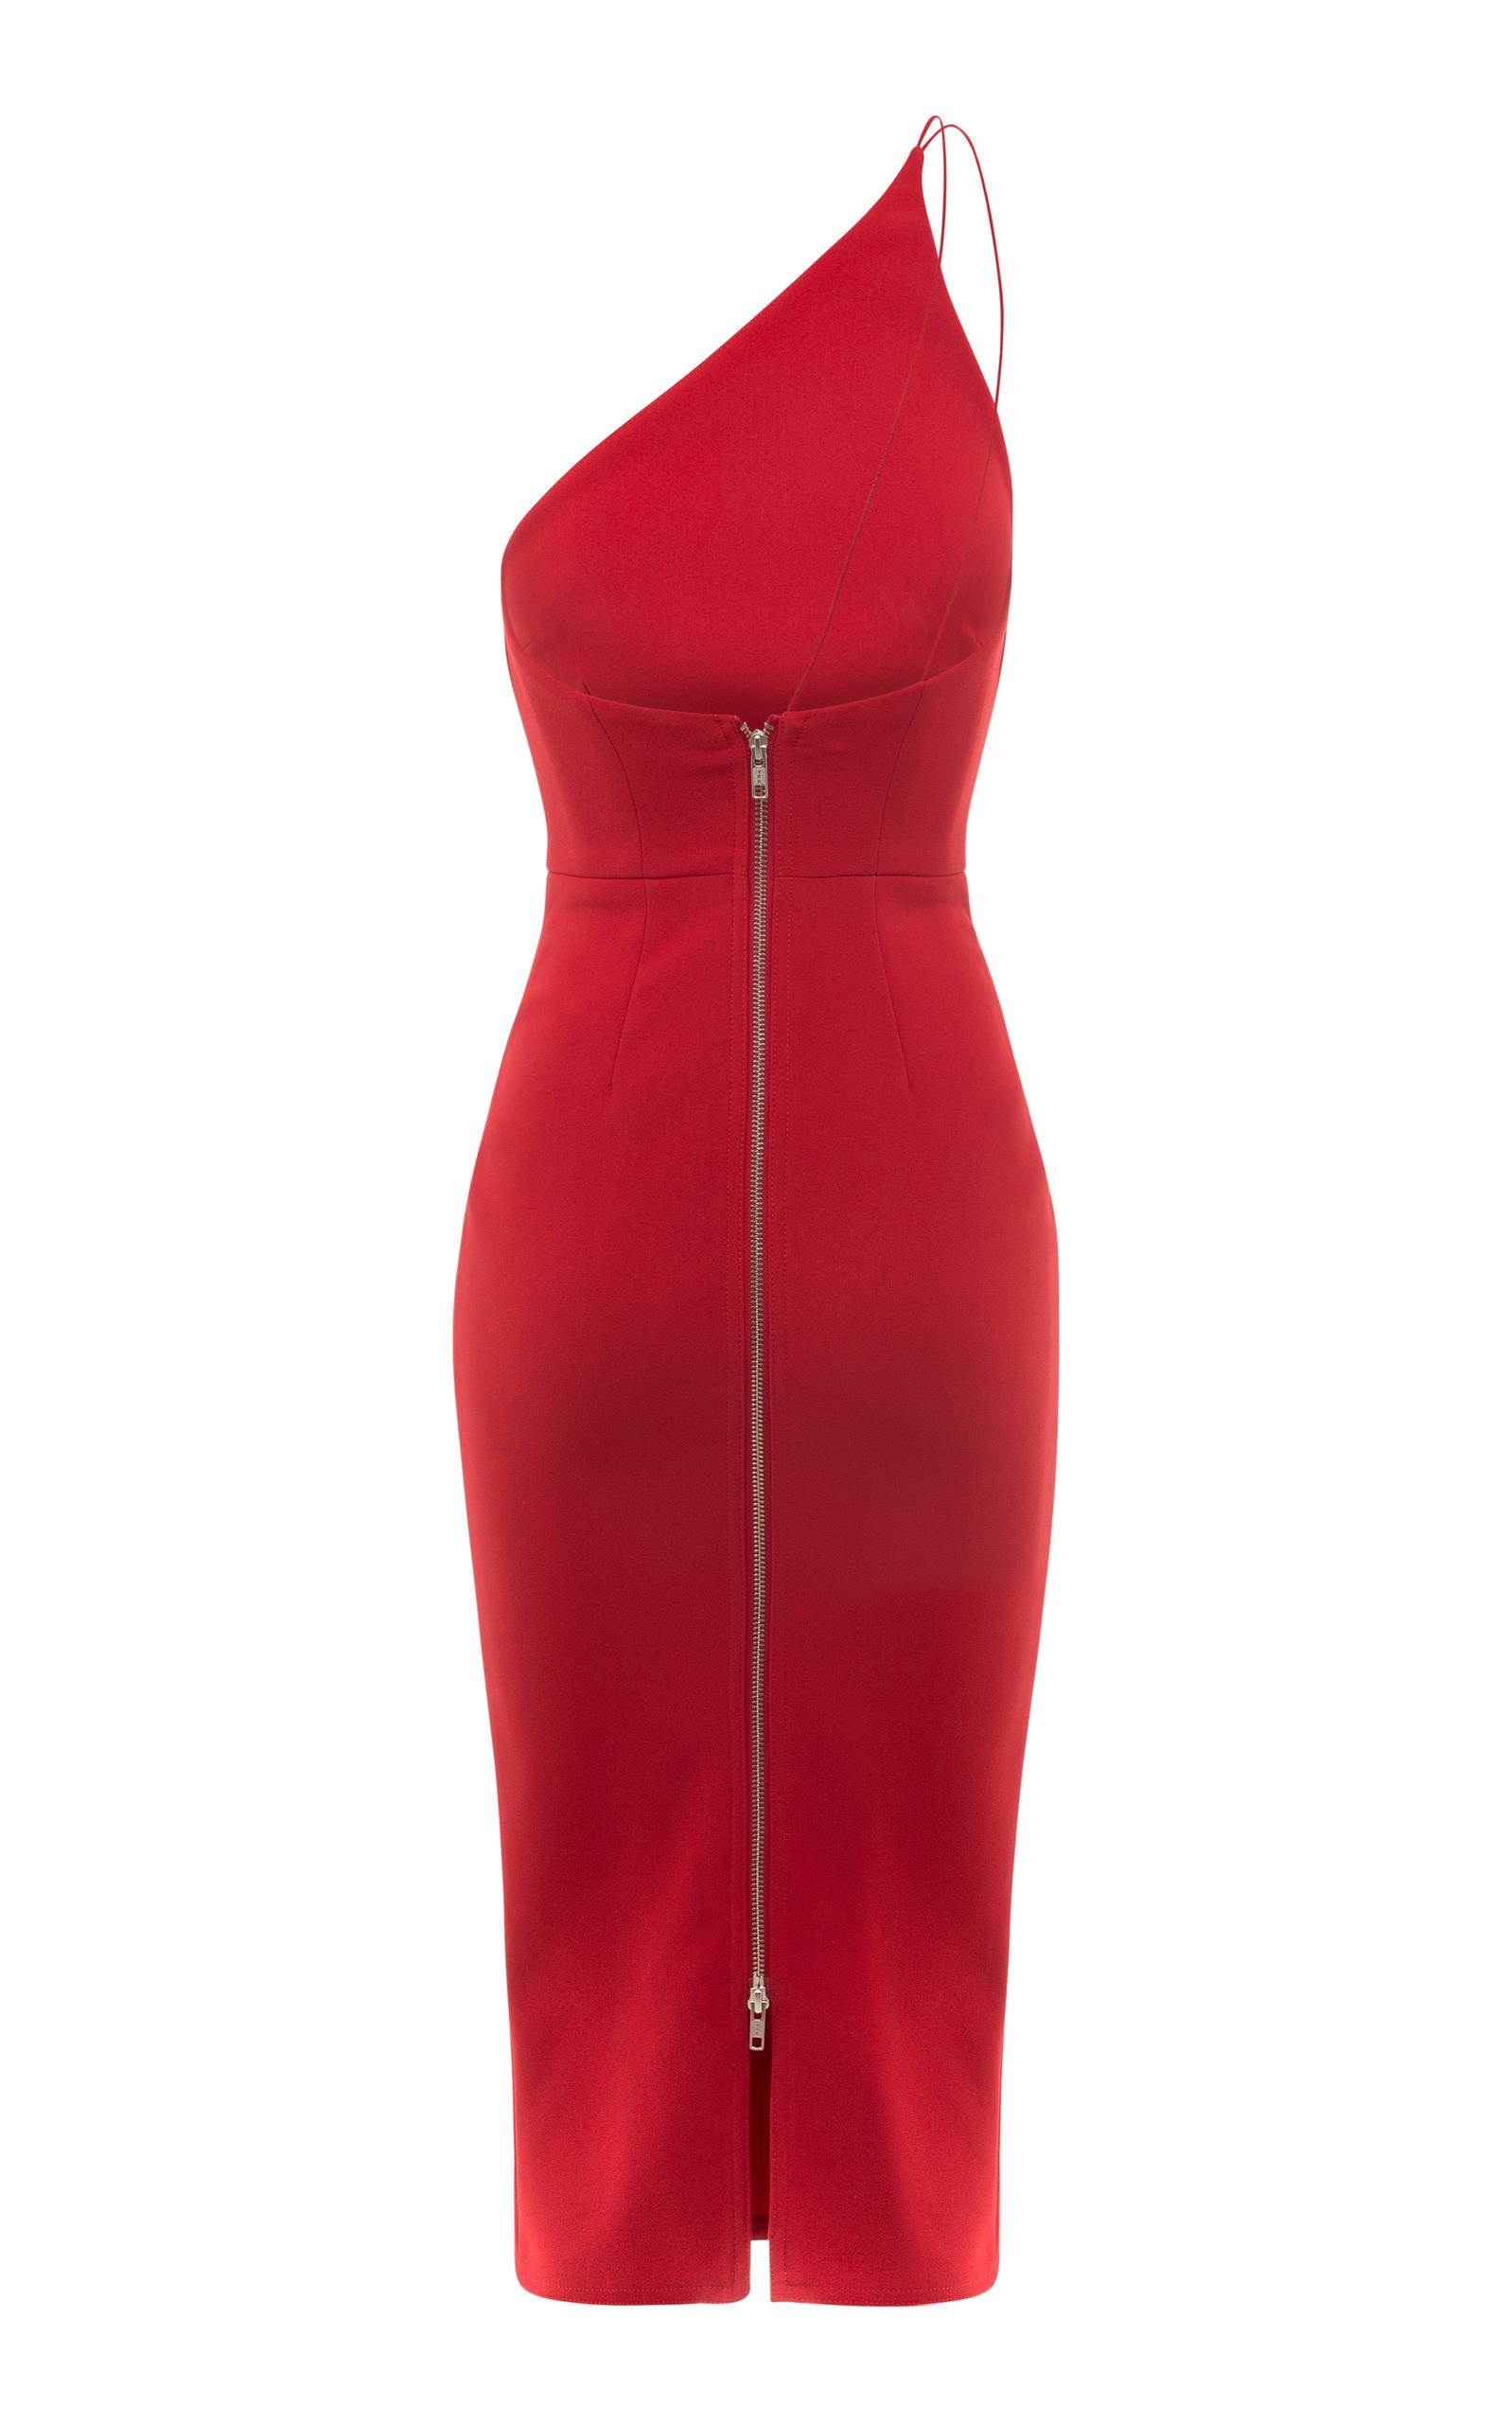 Alex Perry Synthetic Rumer One Shoulder Midi Dress in Red - Lyst